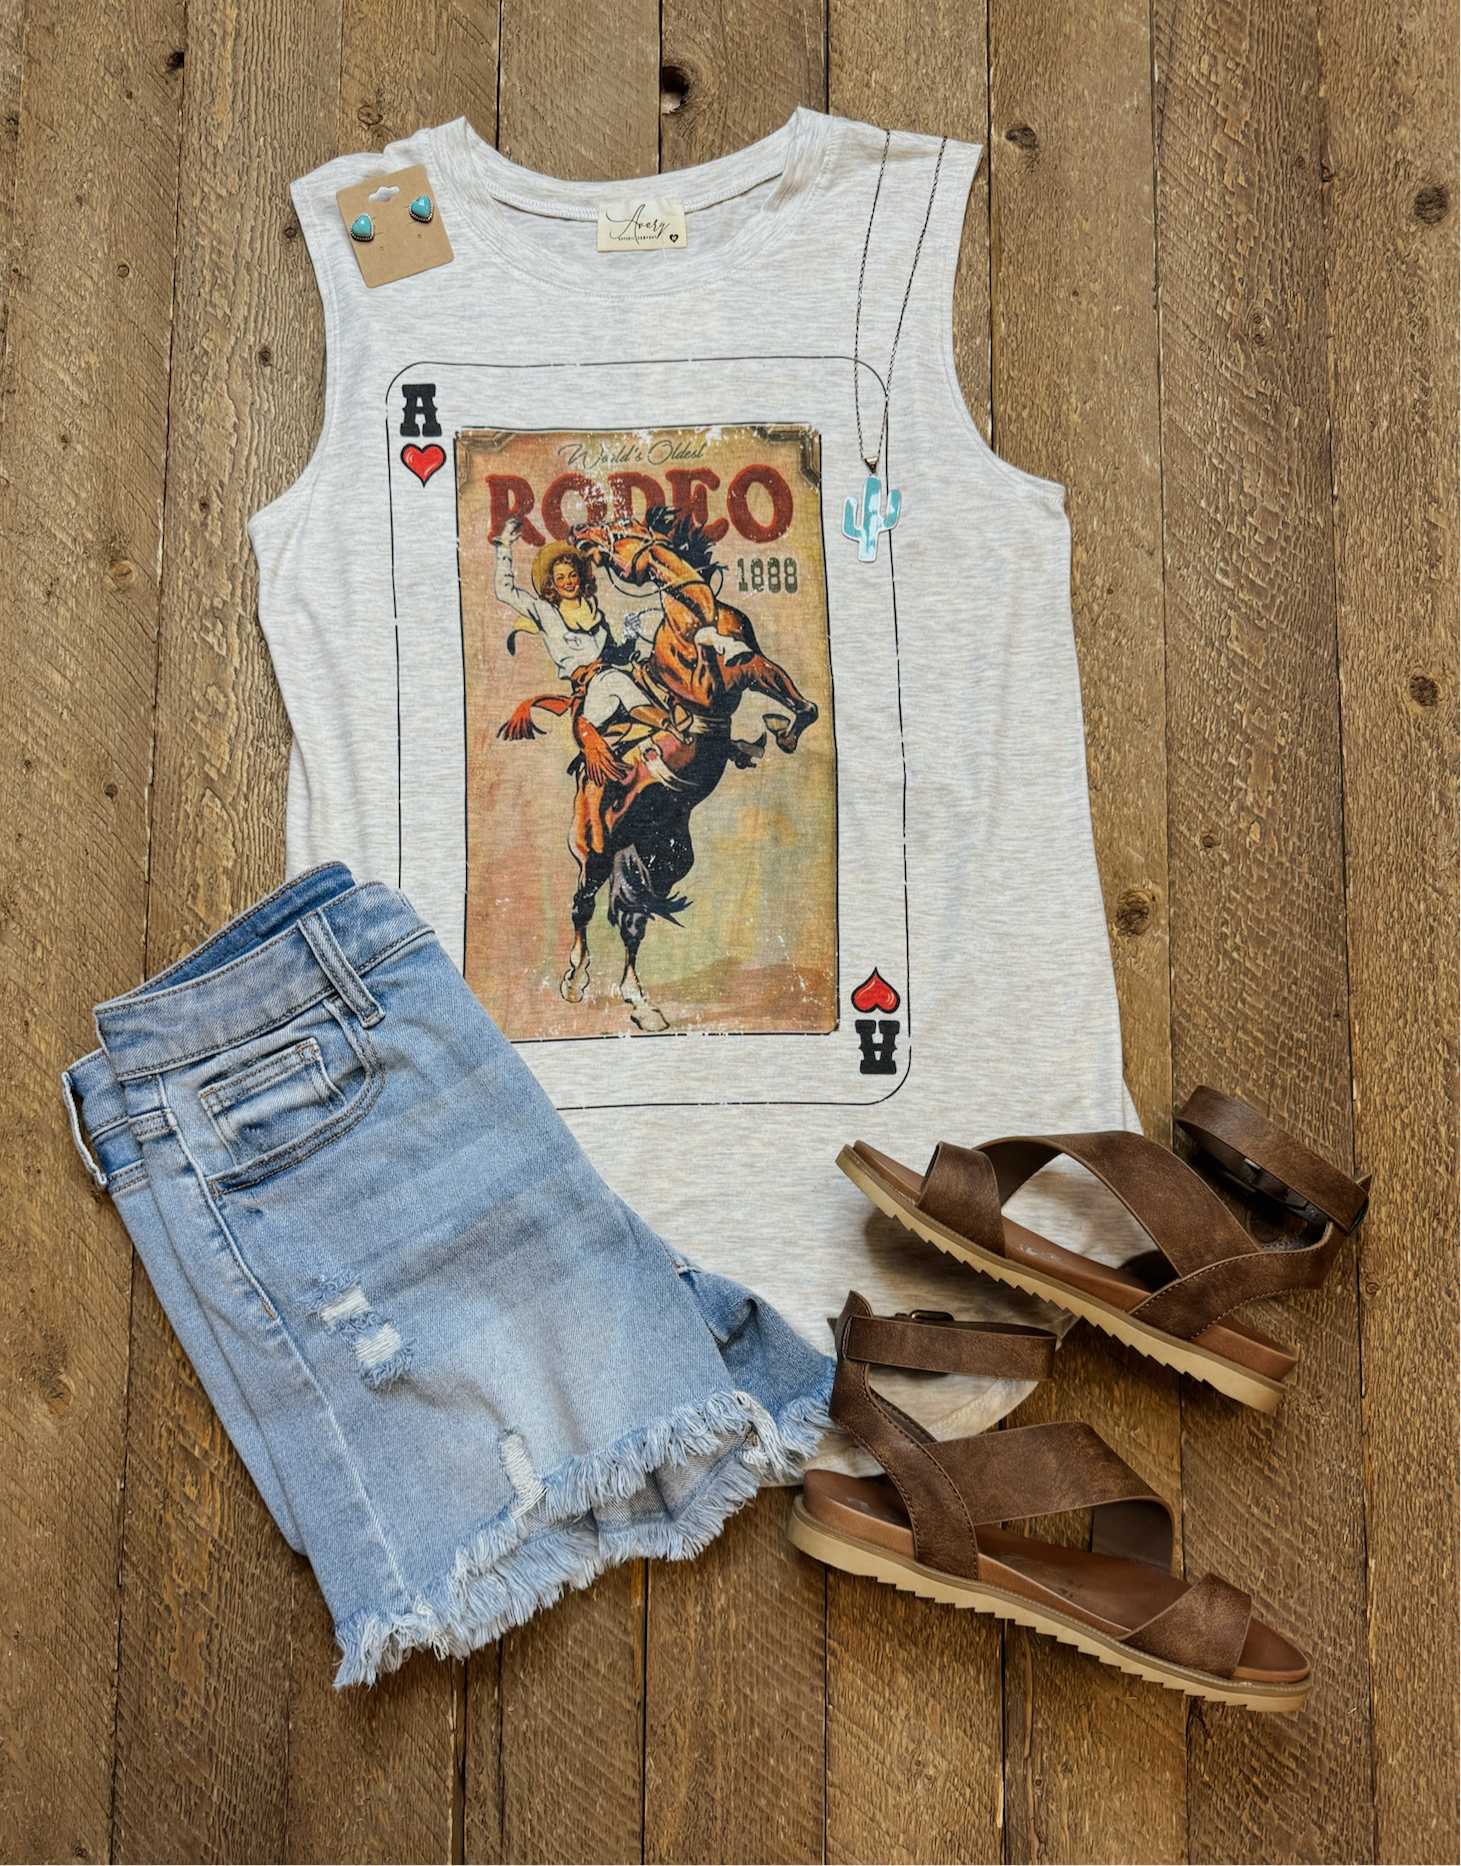 The Vintage Rodeo Card Tank